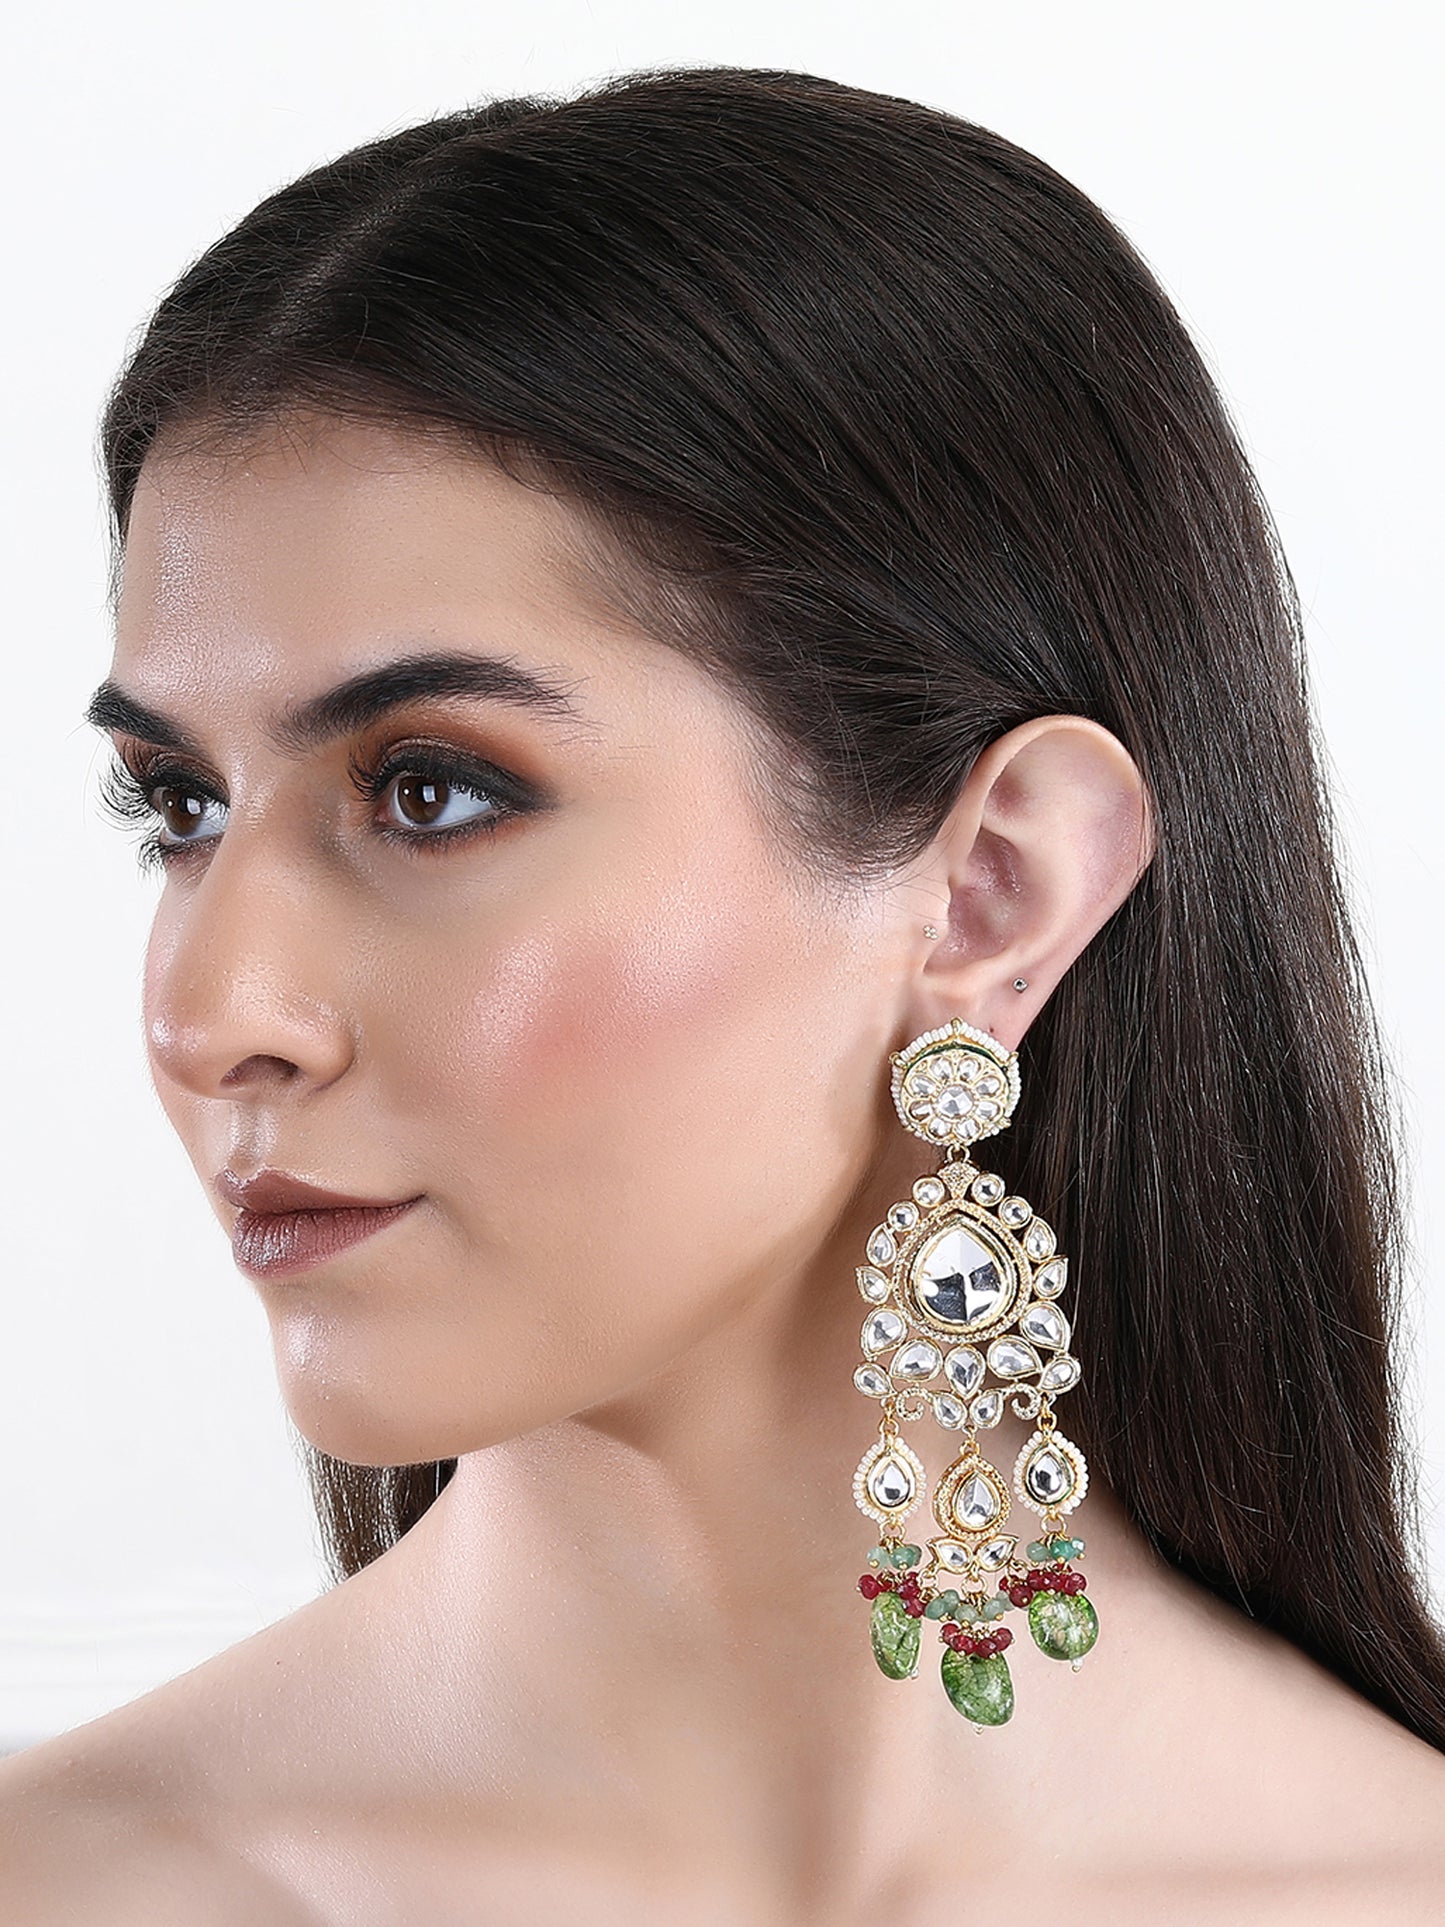 22KT Gold Plated Kundan Classic Green Earring Set For women and Girls